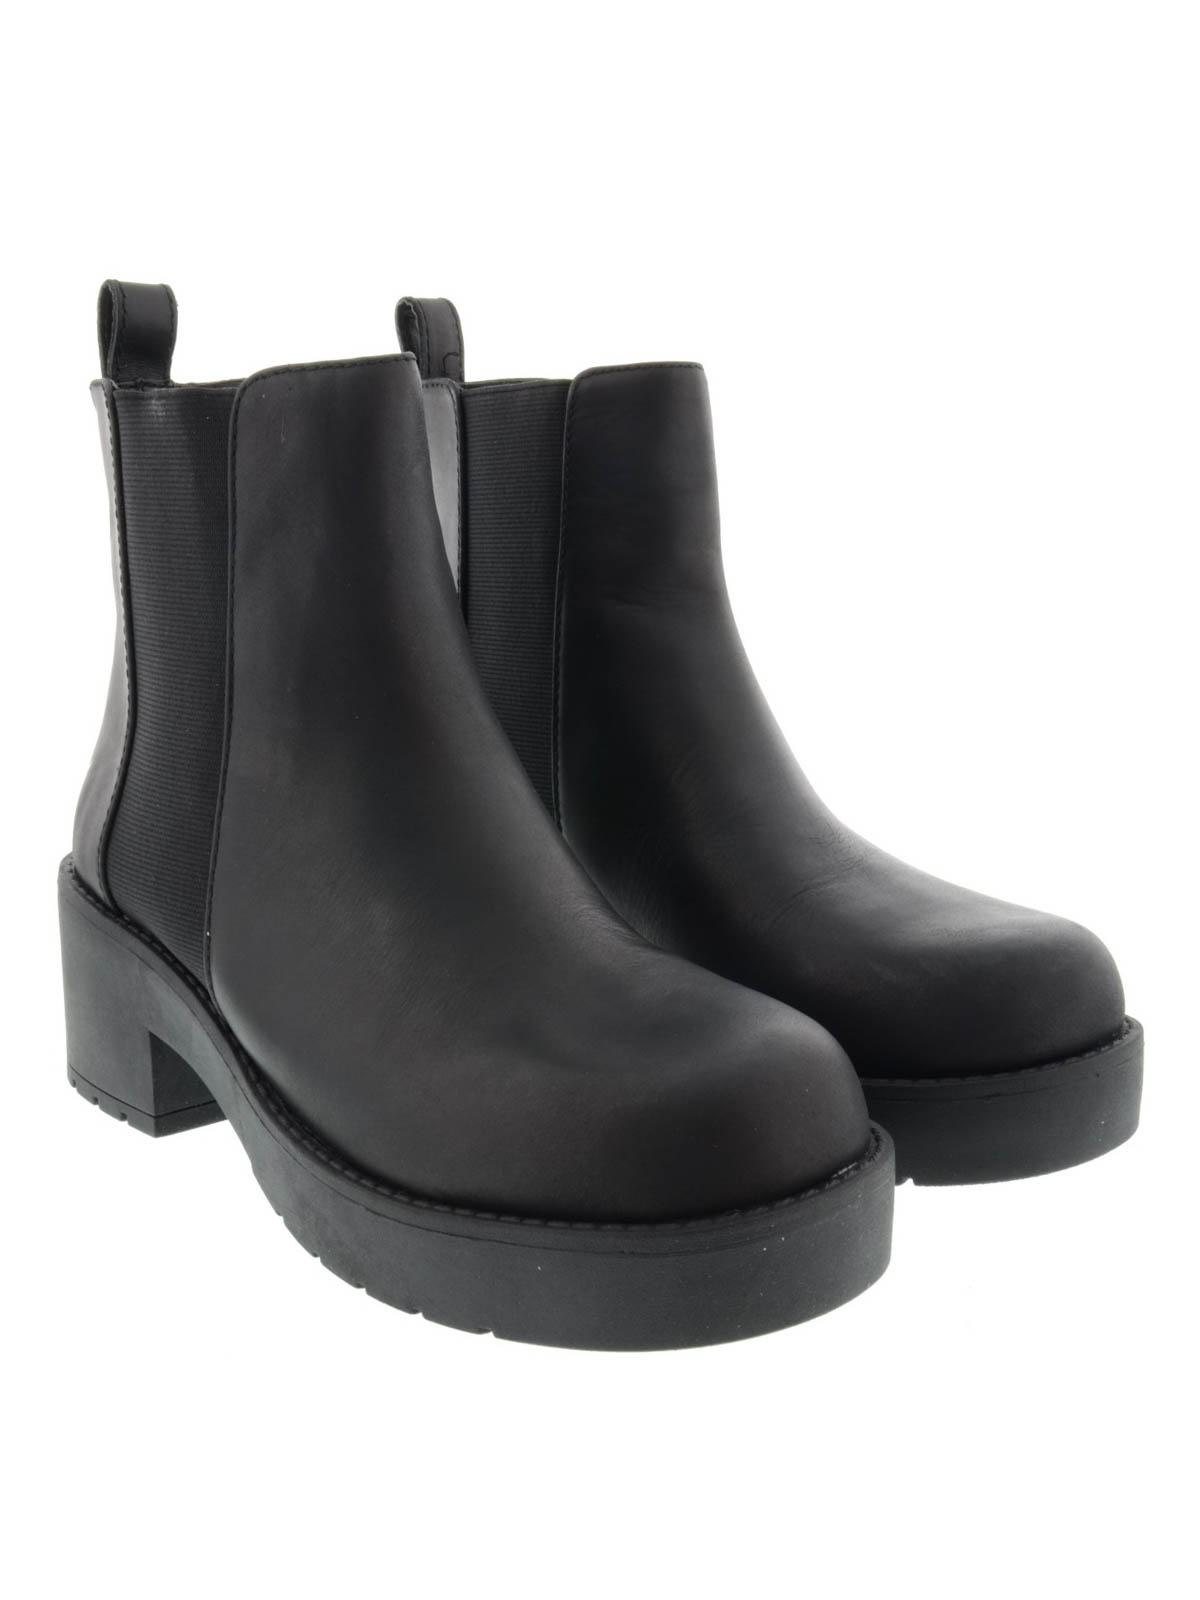 windsor smith black boots